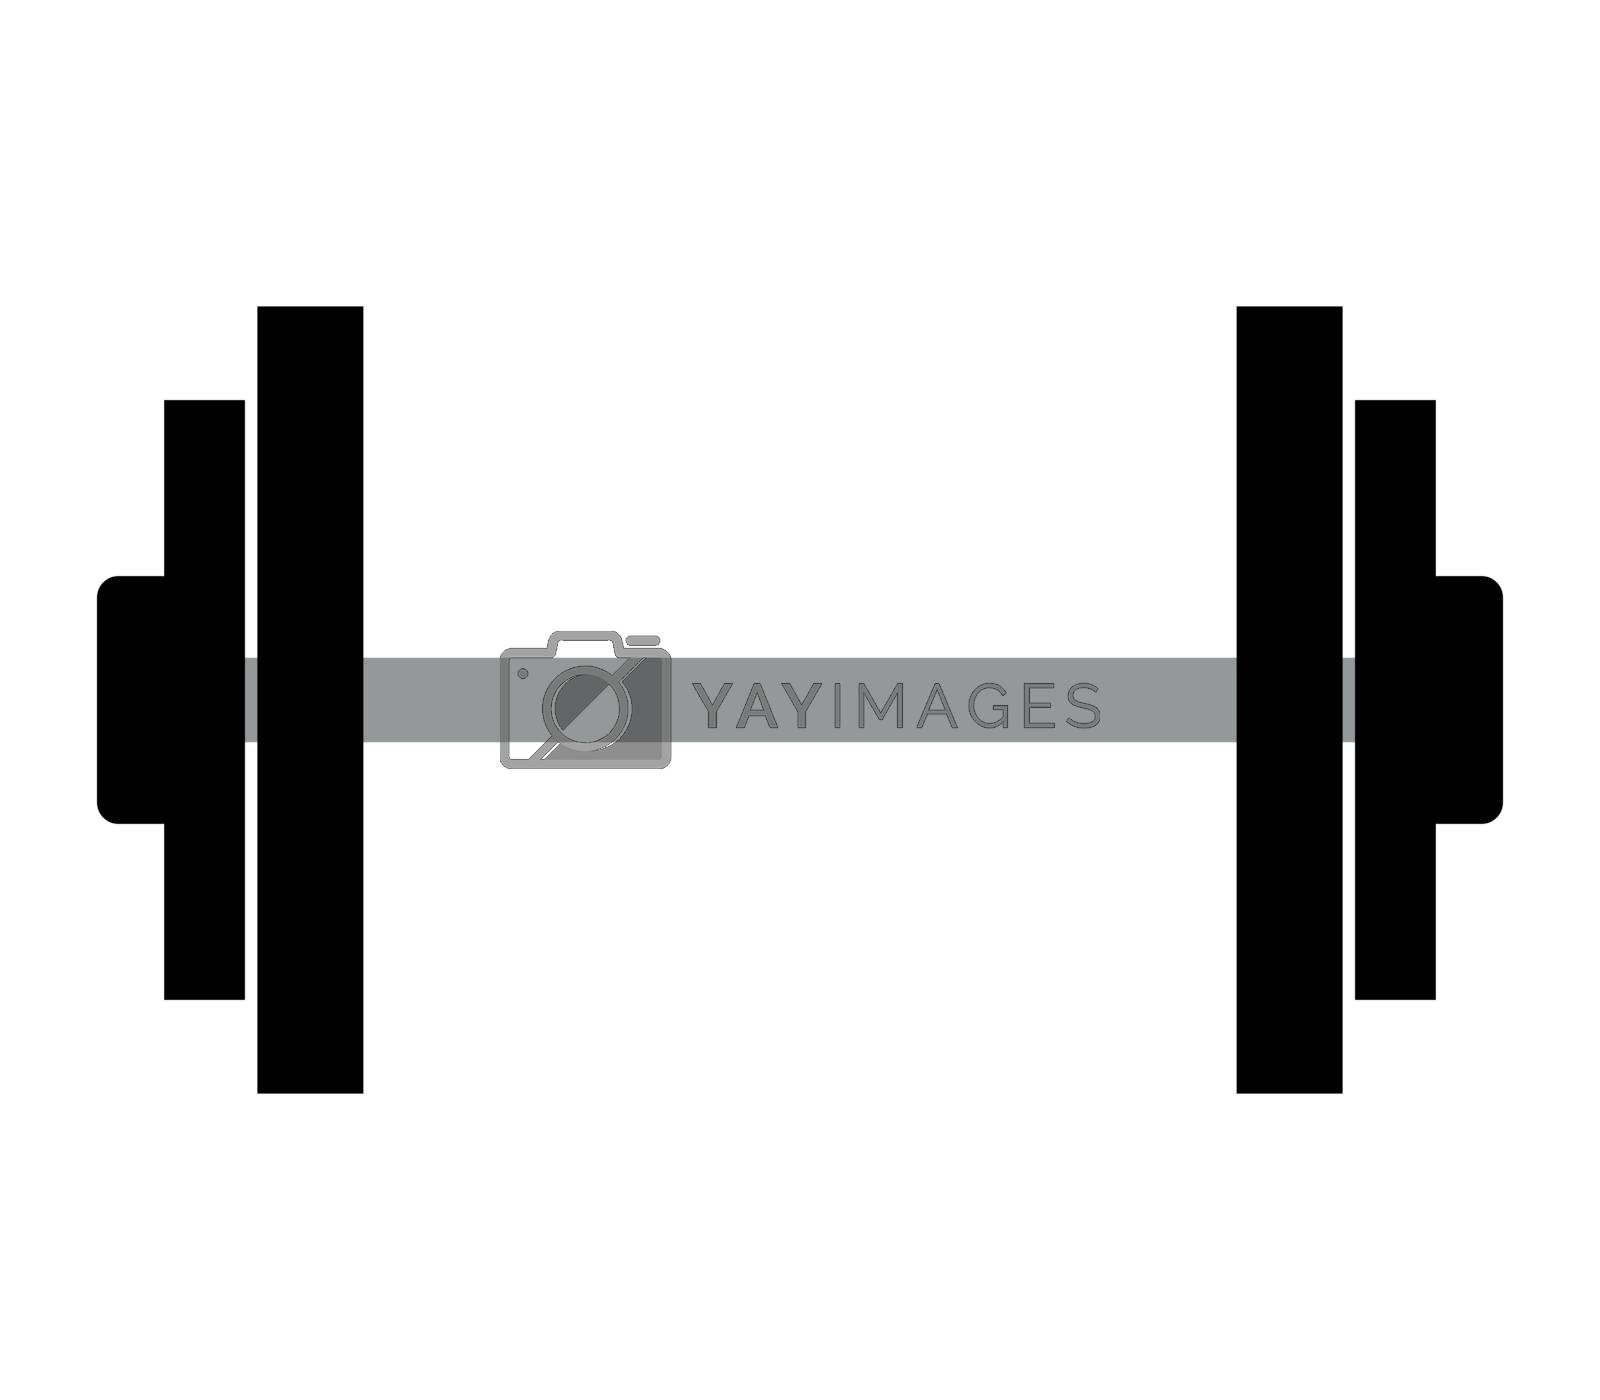 Royalty free image of gym weights icon by Mark1987